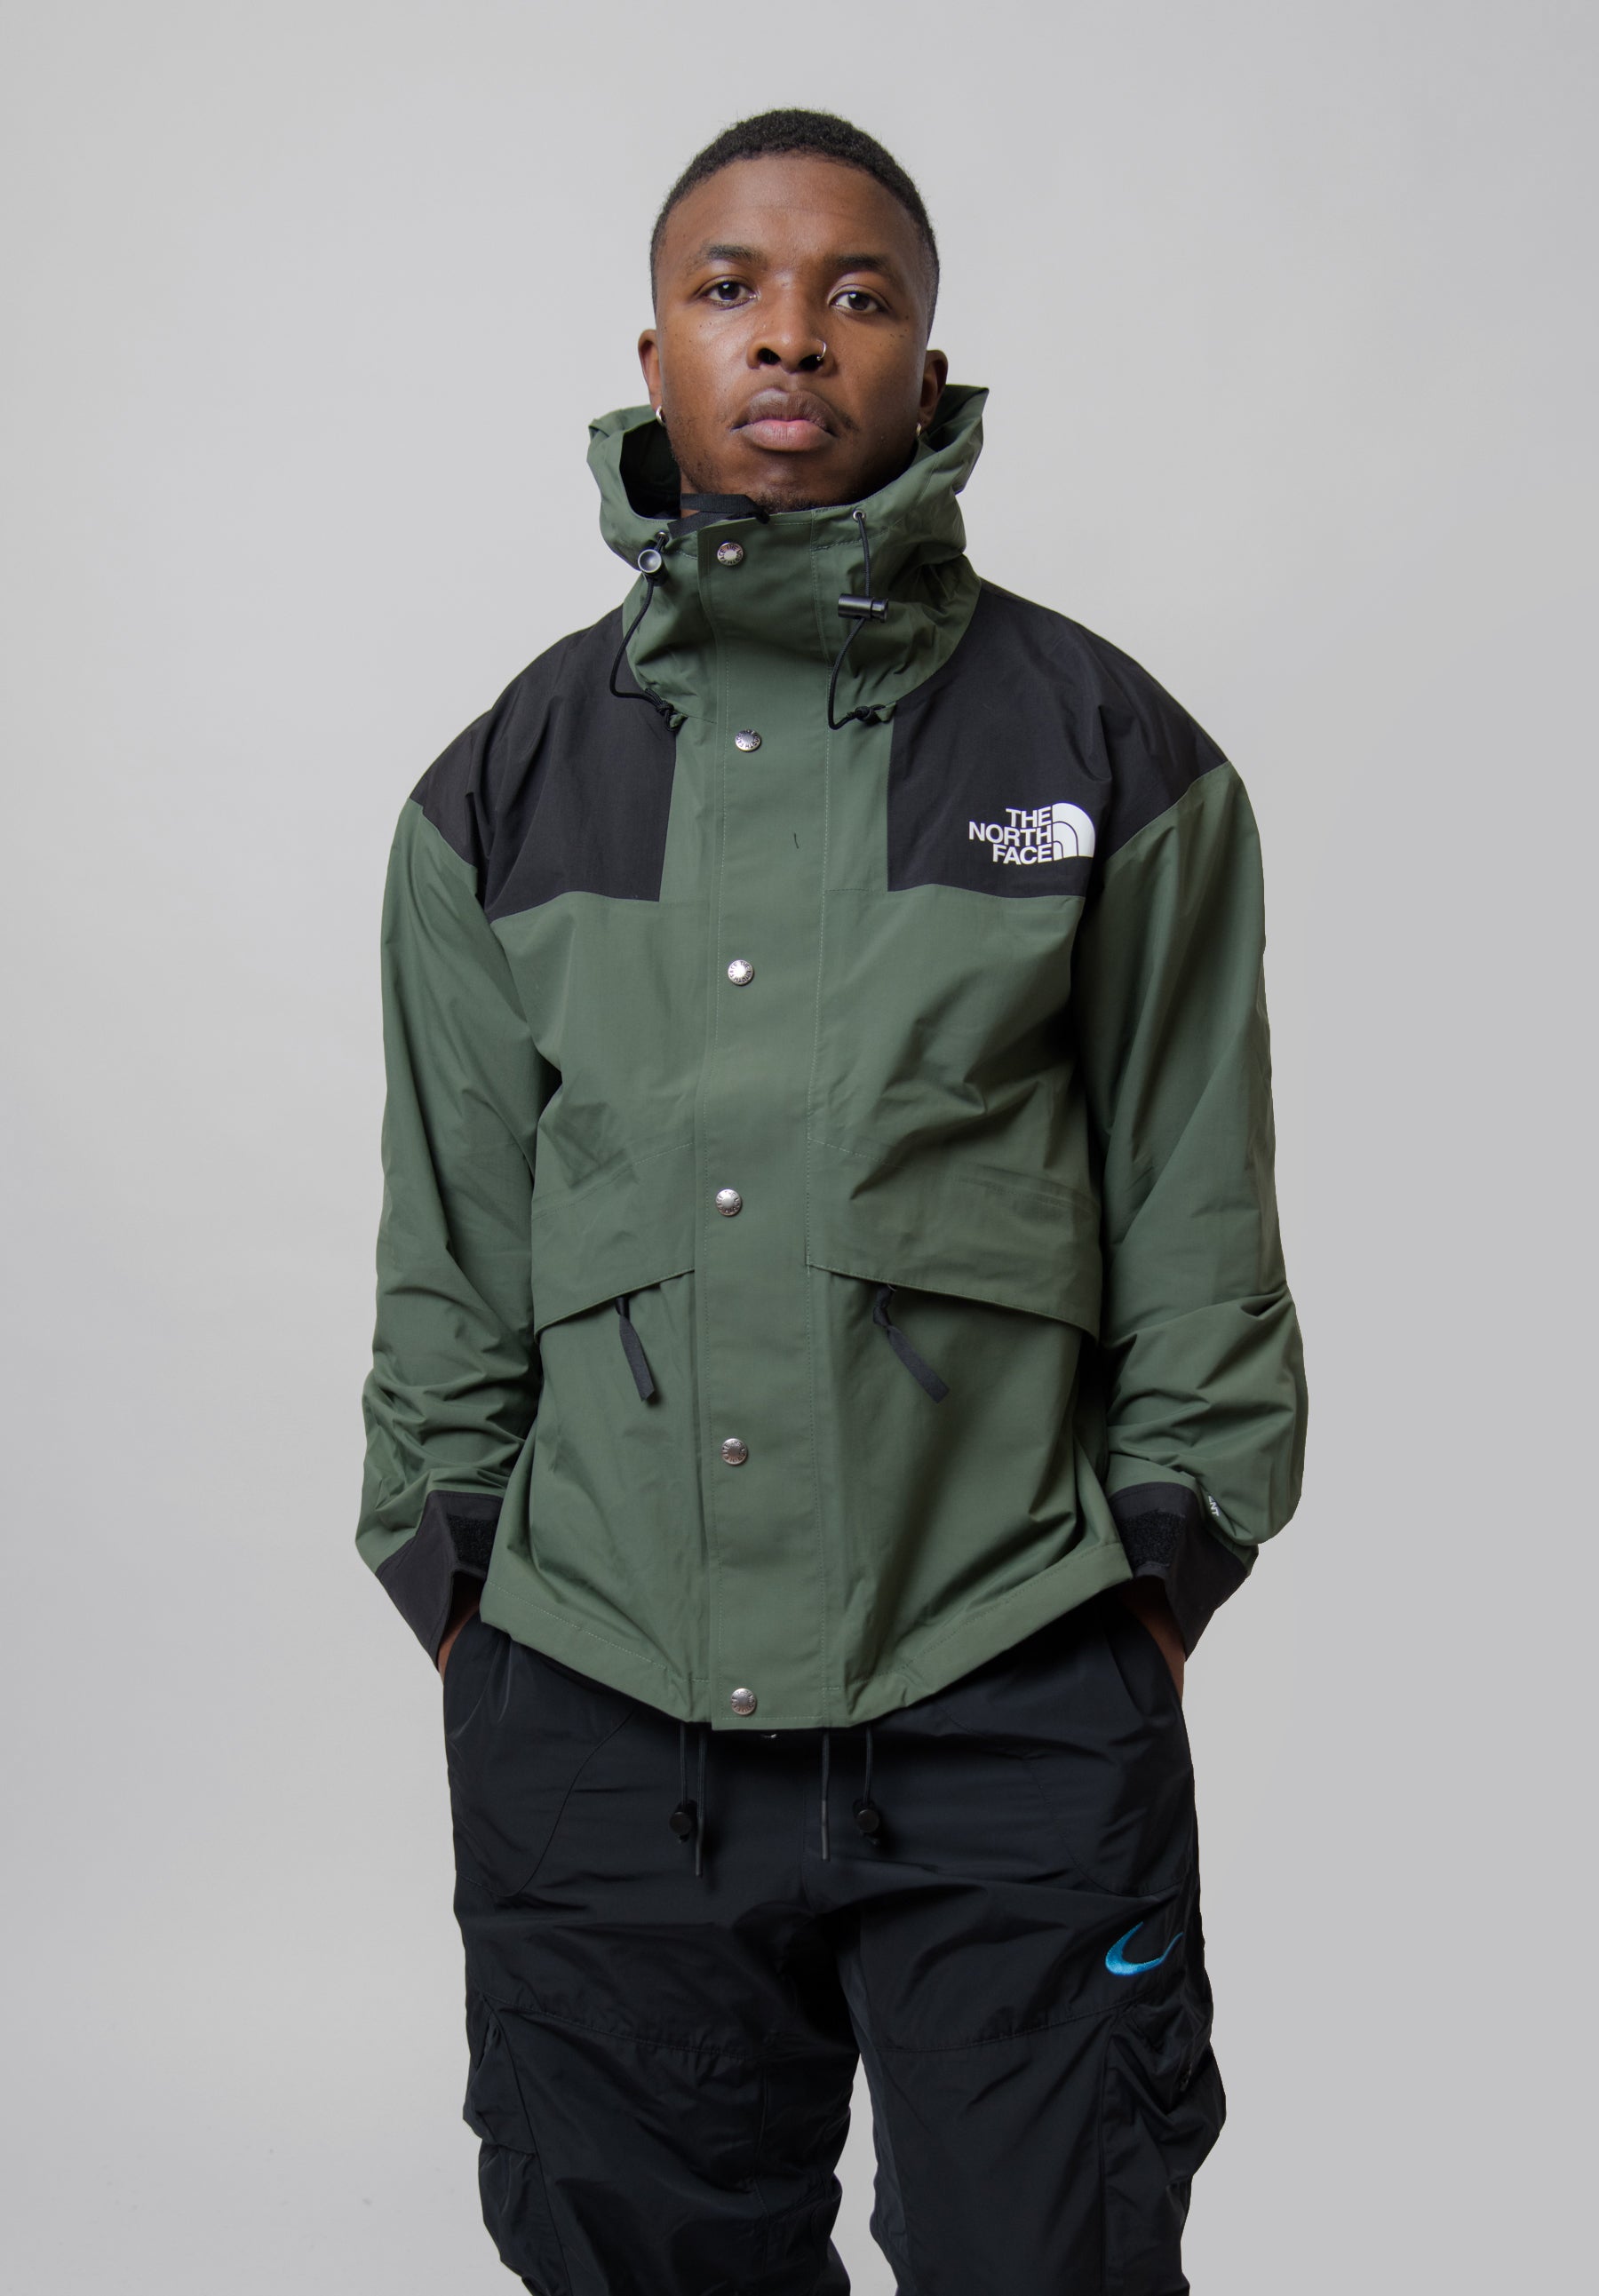 THE NORTH FACE GORE-TEX MOUNTAIN JACKET